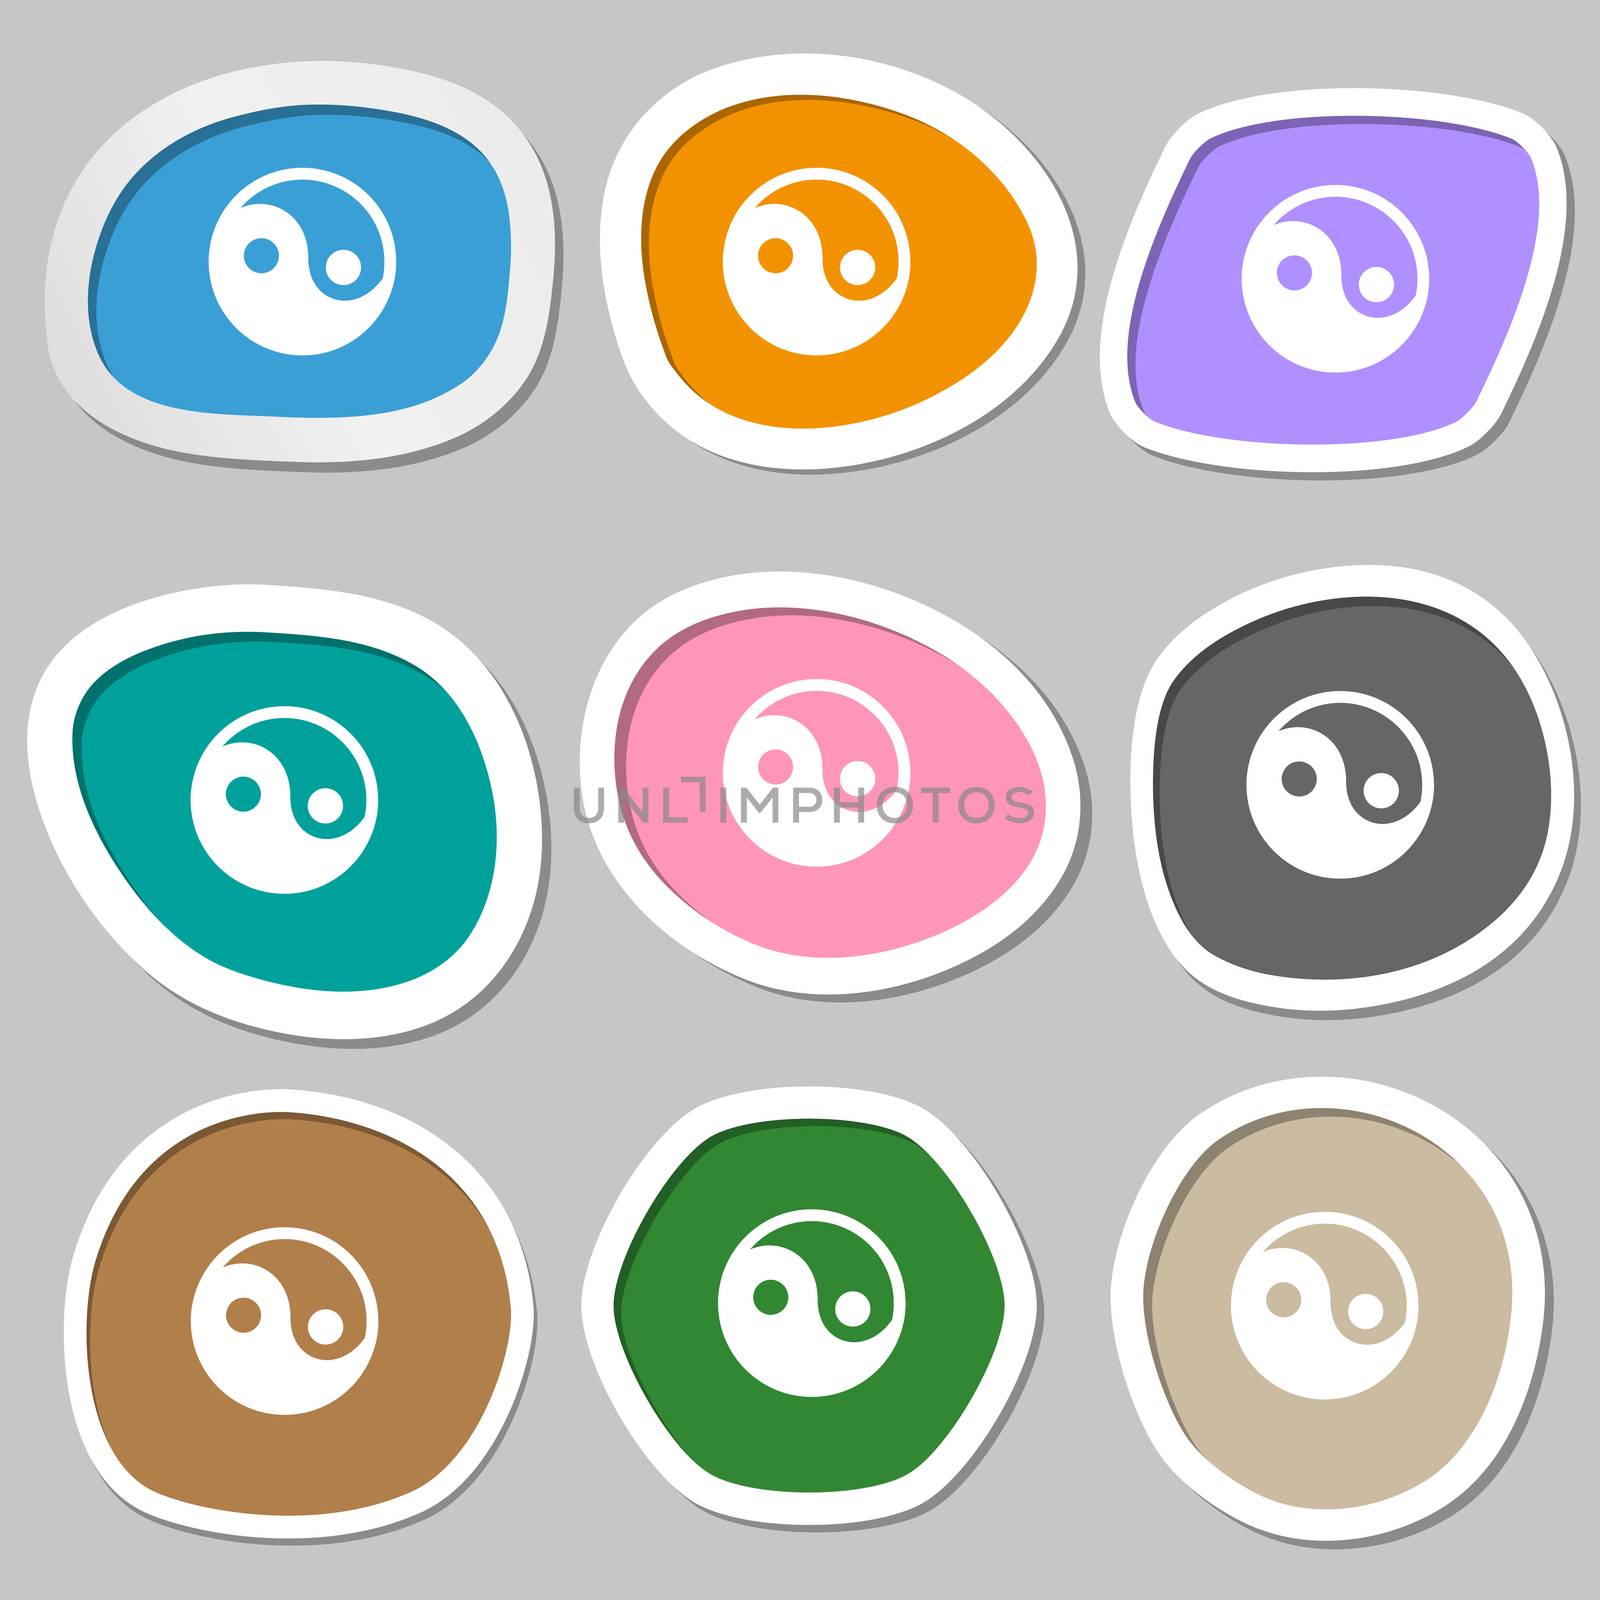 Ying yang icon symbols. Multicolored paper stickers. illustration